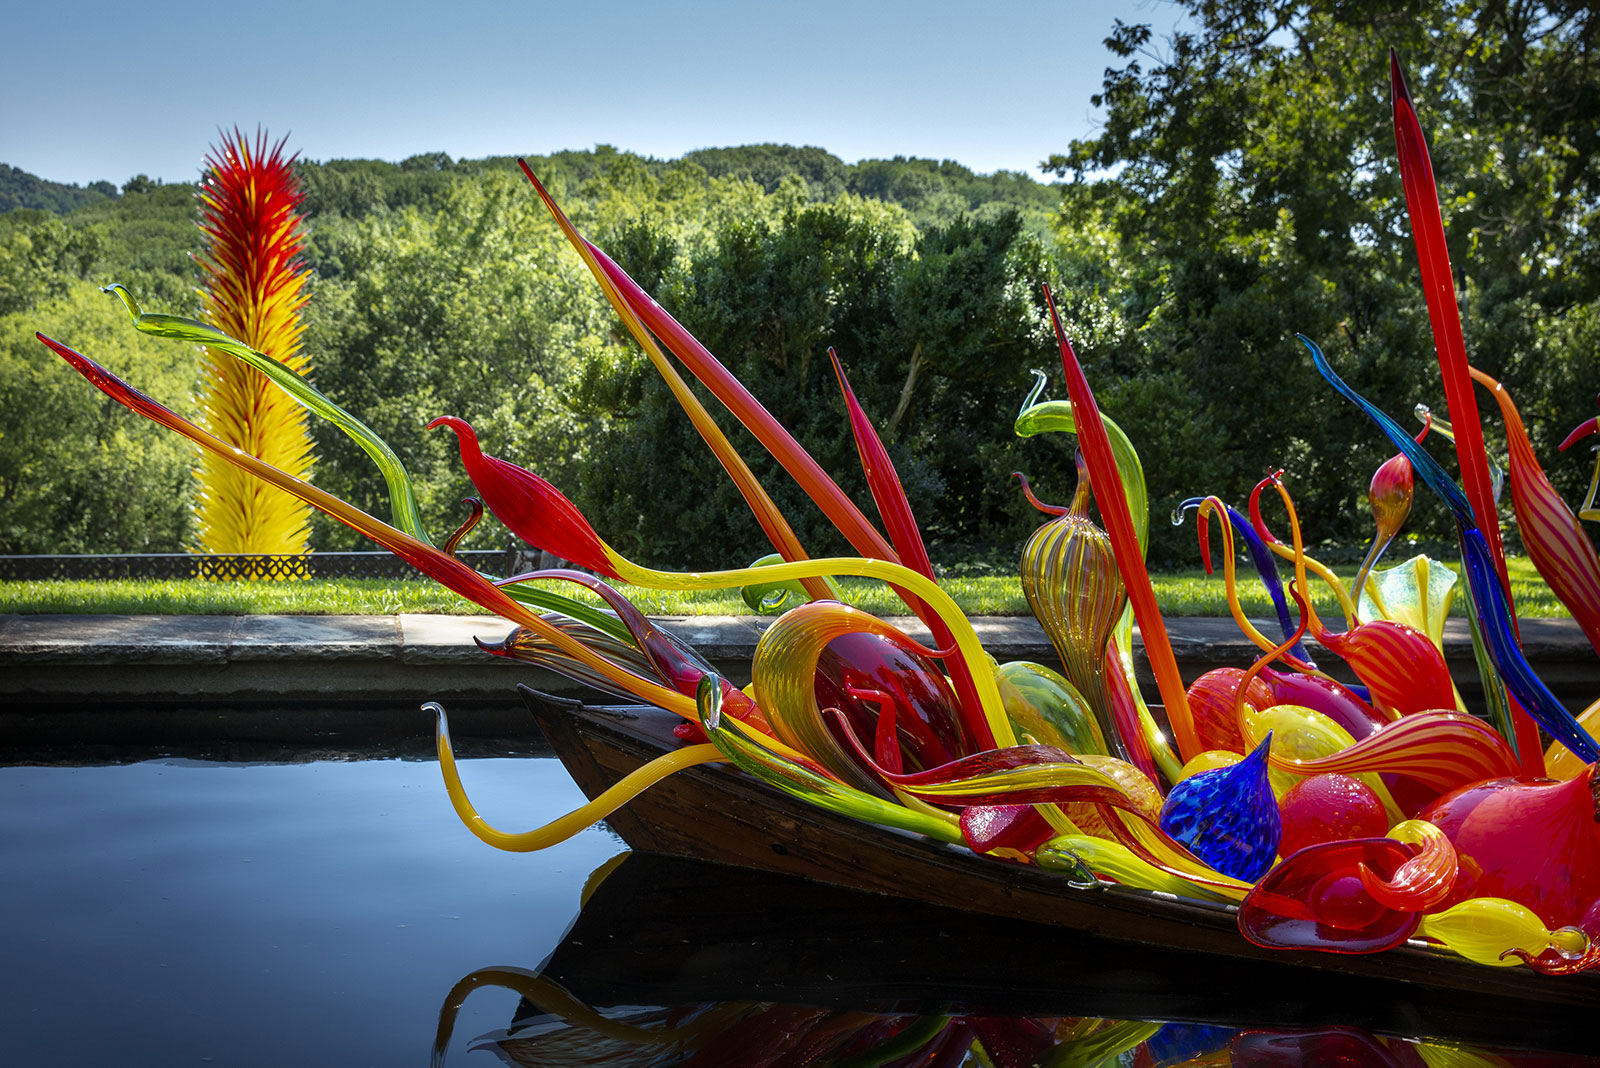 Fiori Boat (2018) by Dale Chihuly